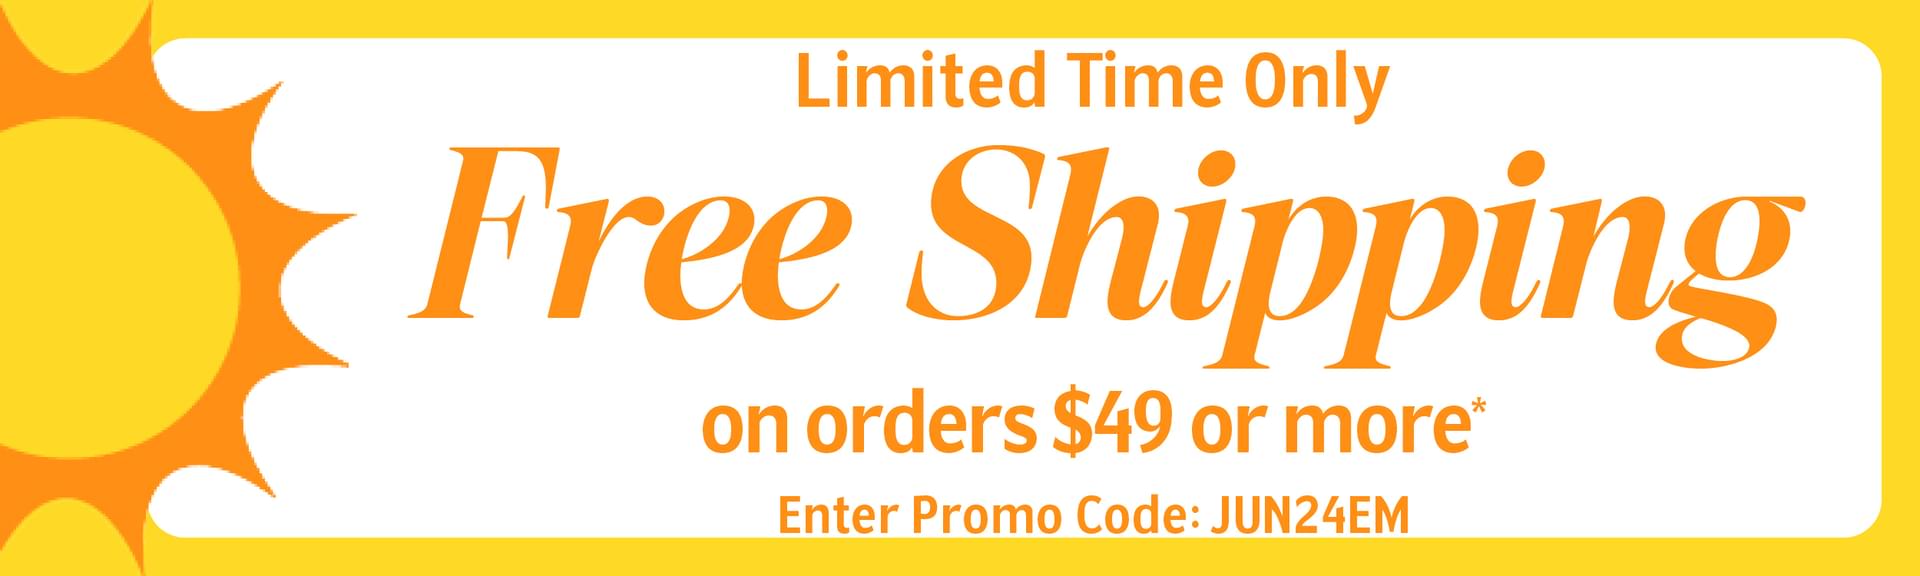 Free Shipping on orders $49 or more! 